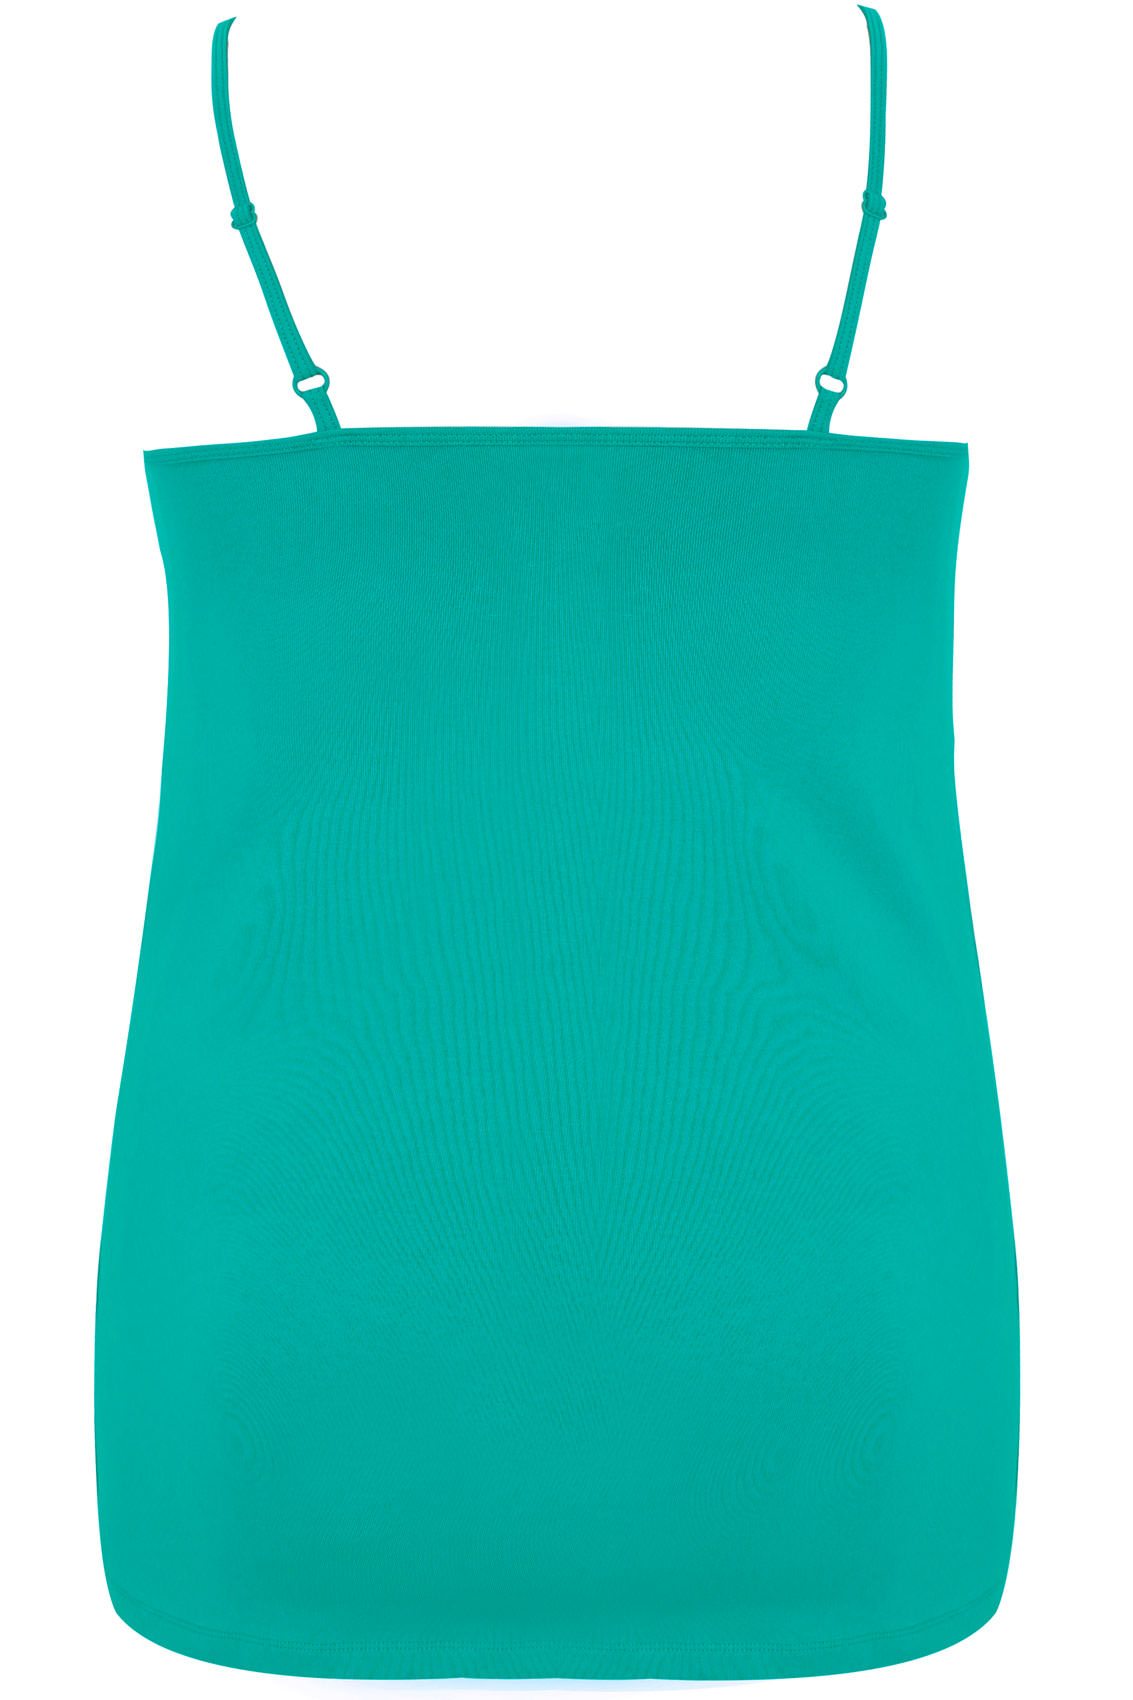 Jade Green Cami Vest Top, Plus size 16 to 36